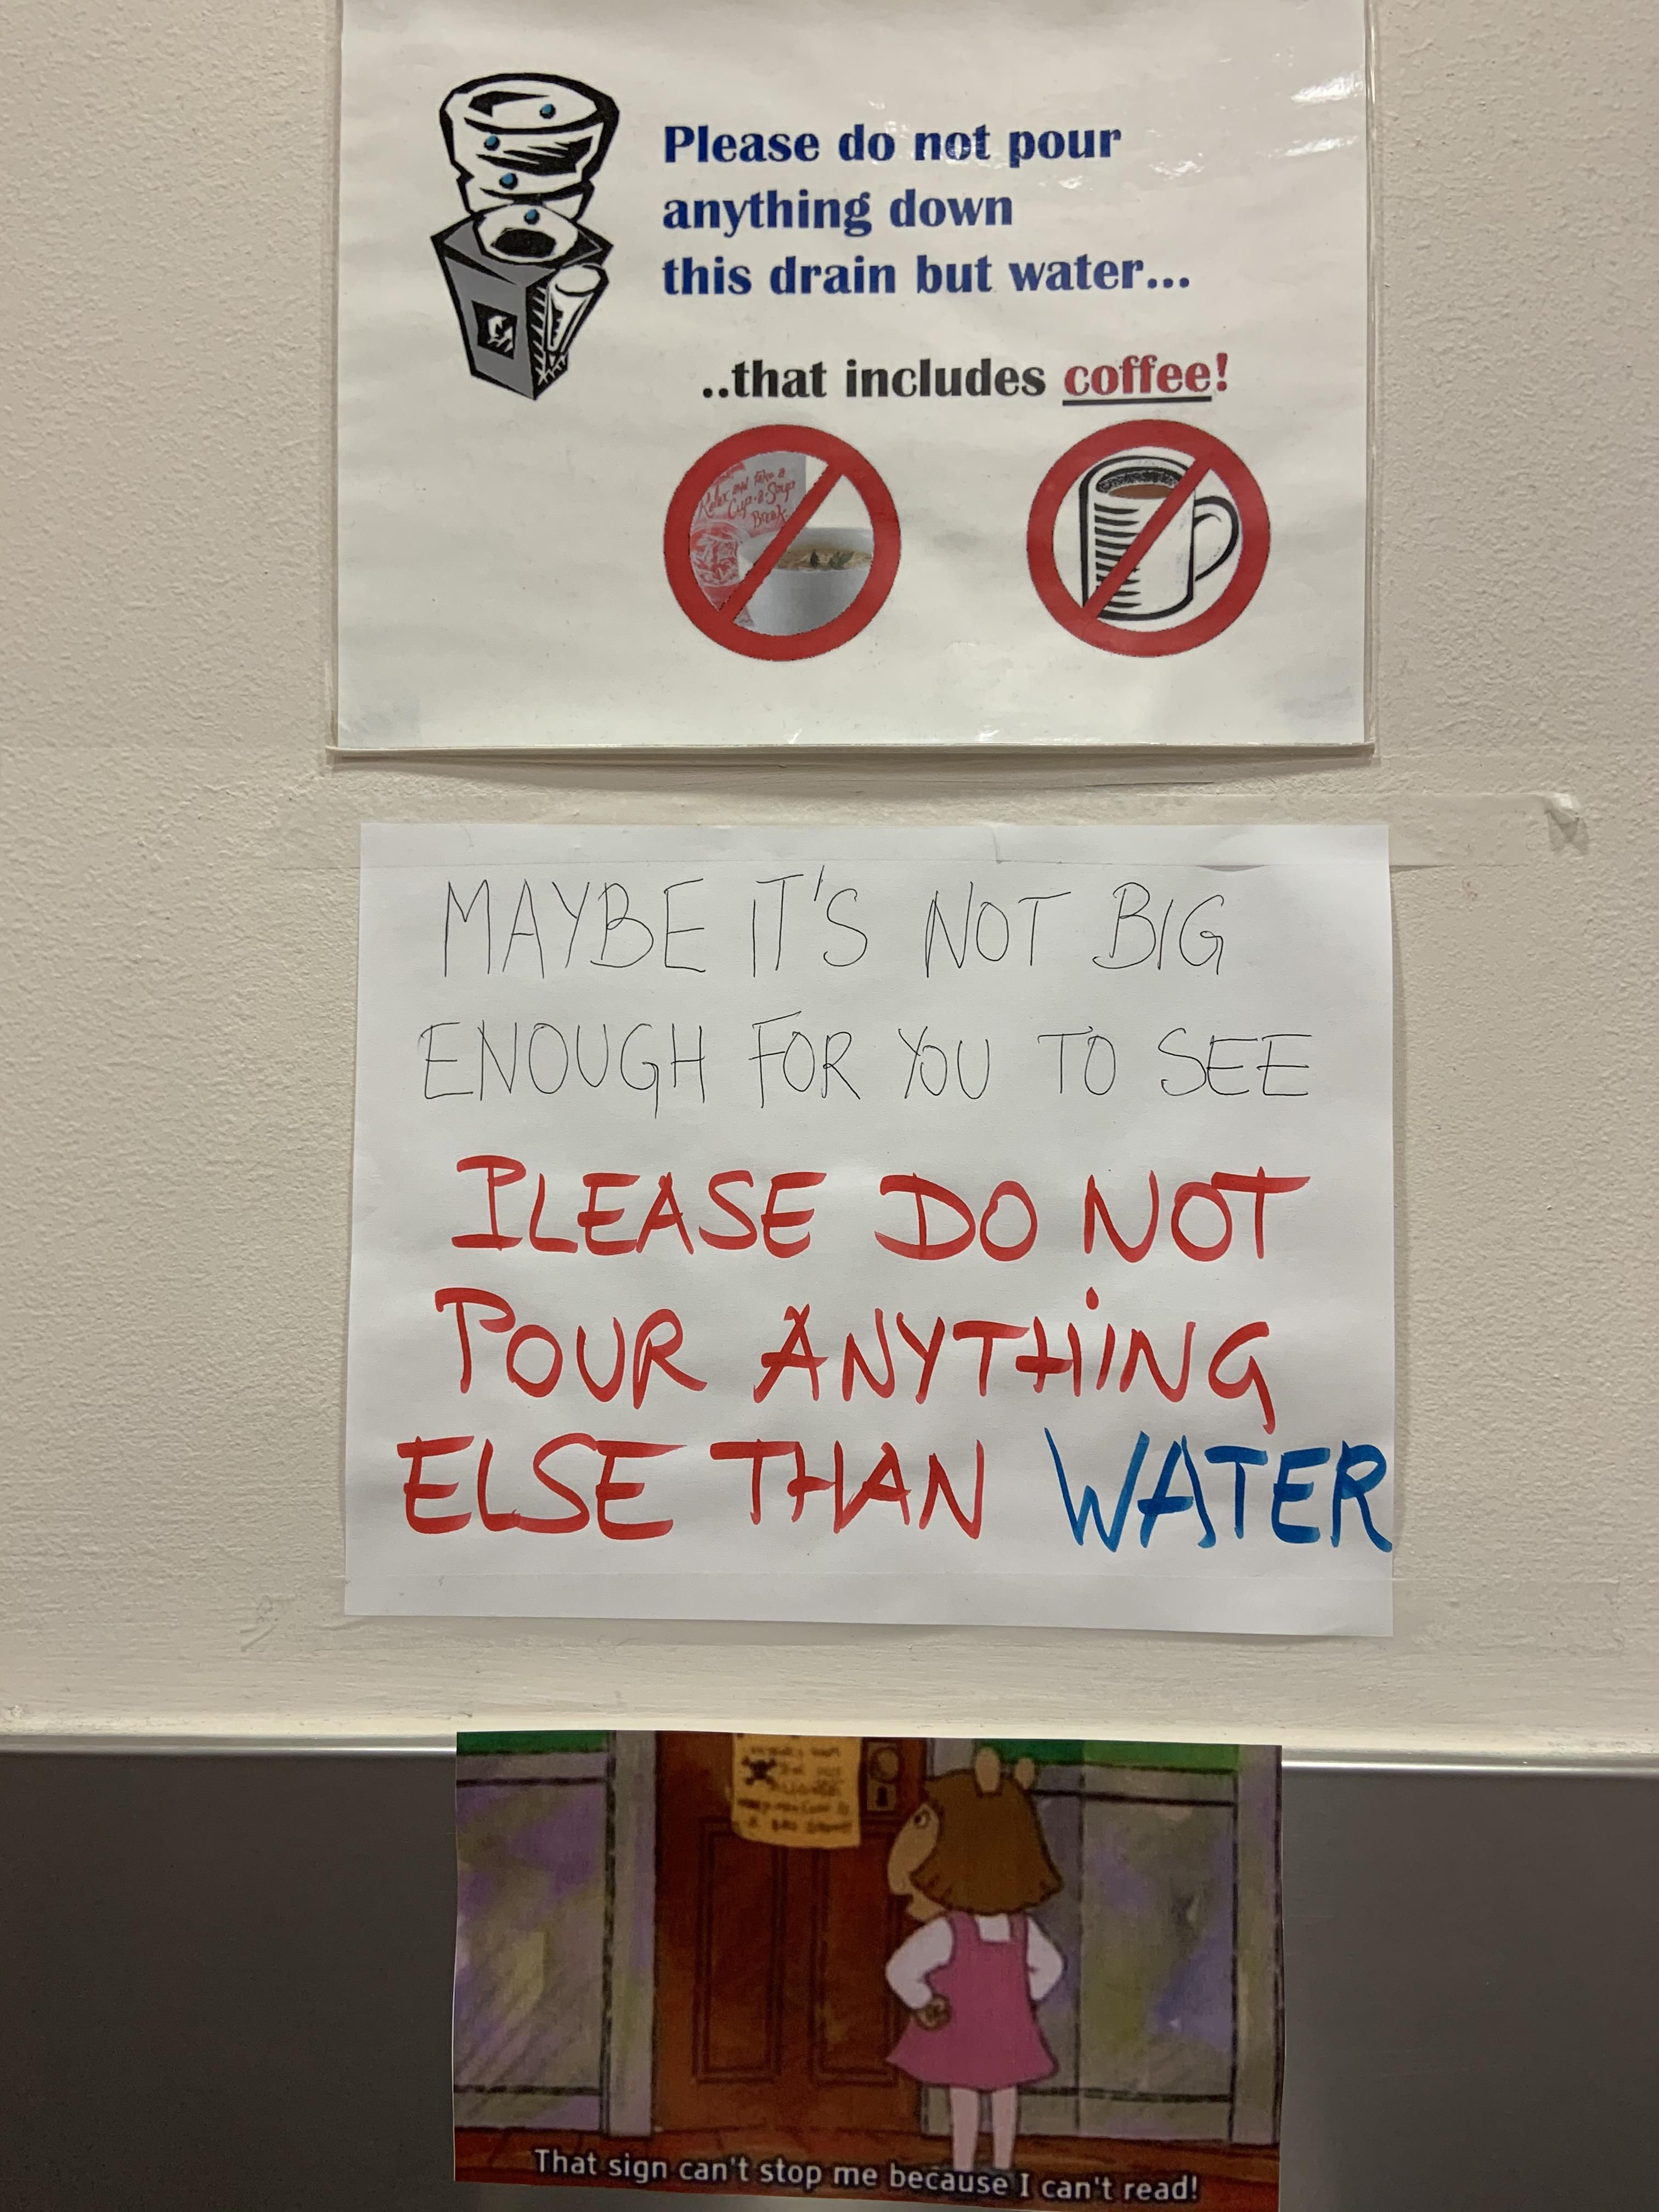 The people at my workplace are getting salty about their water fountain rules.